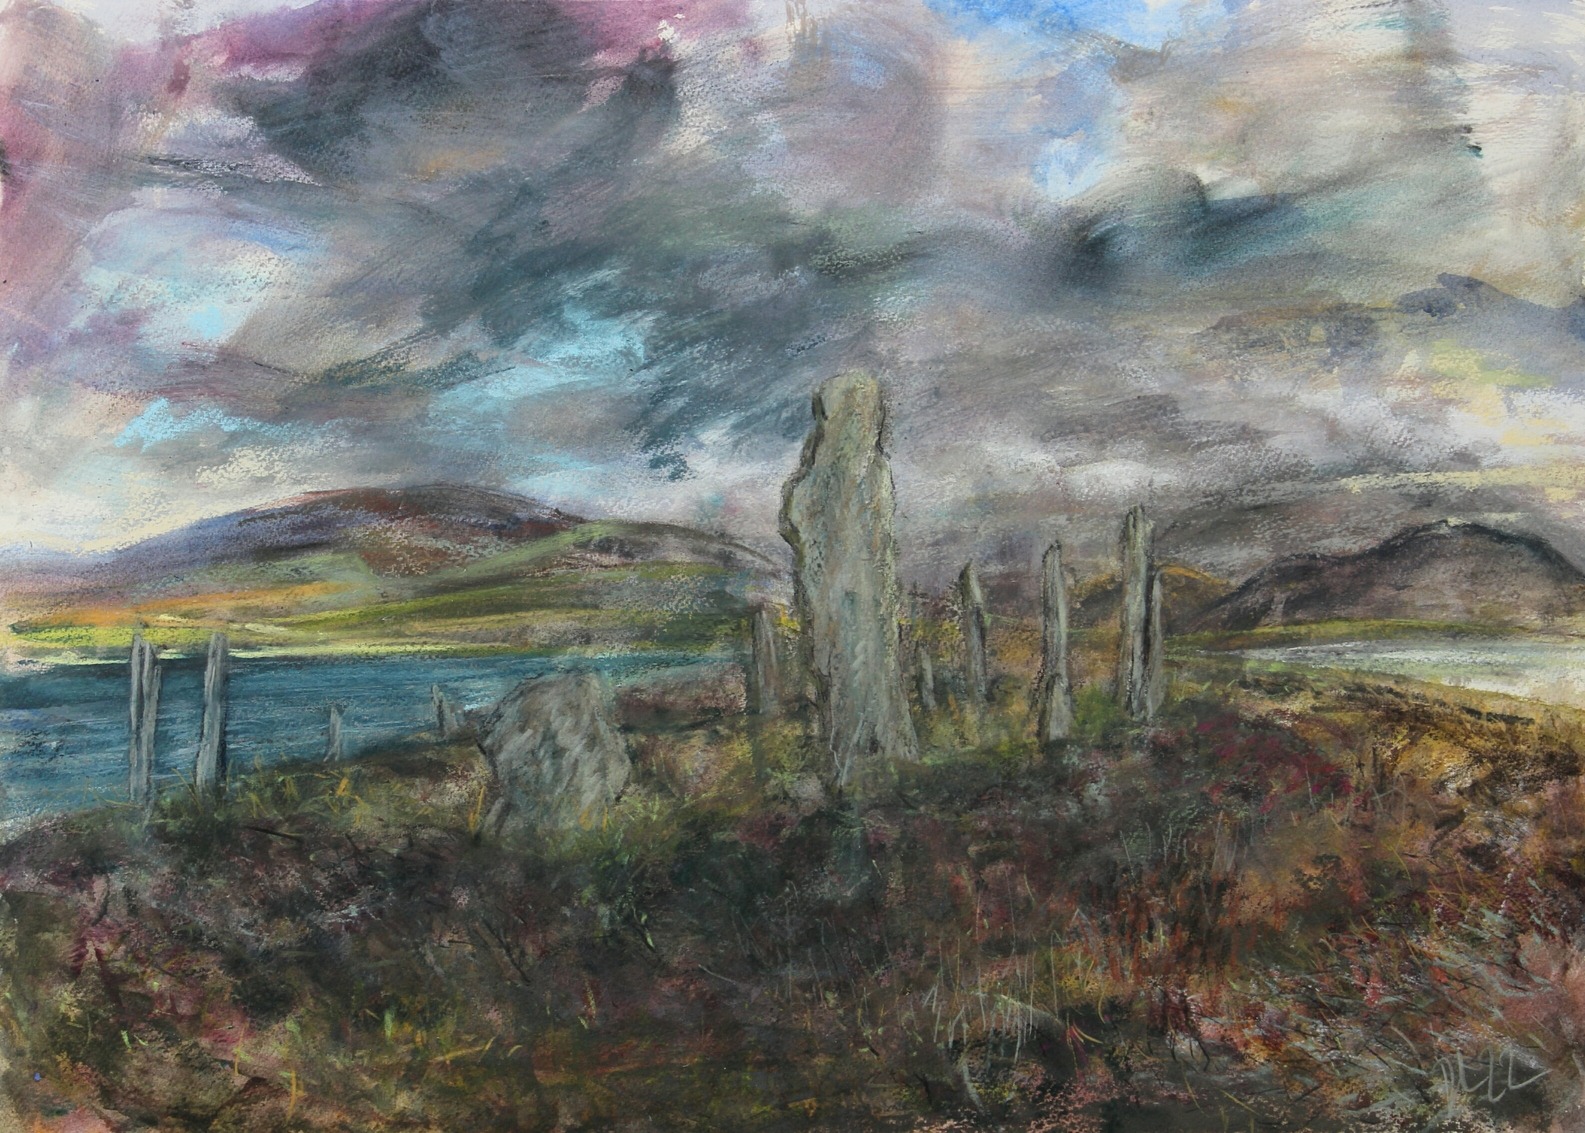 Ring of Brodgar. Mixed media on paper. 50x70cm.